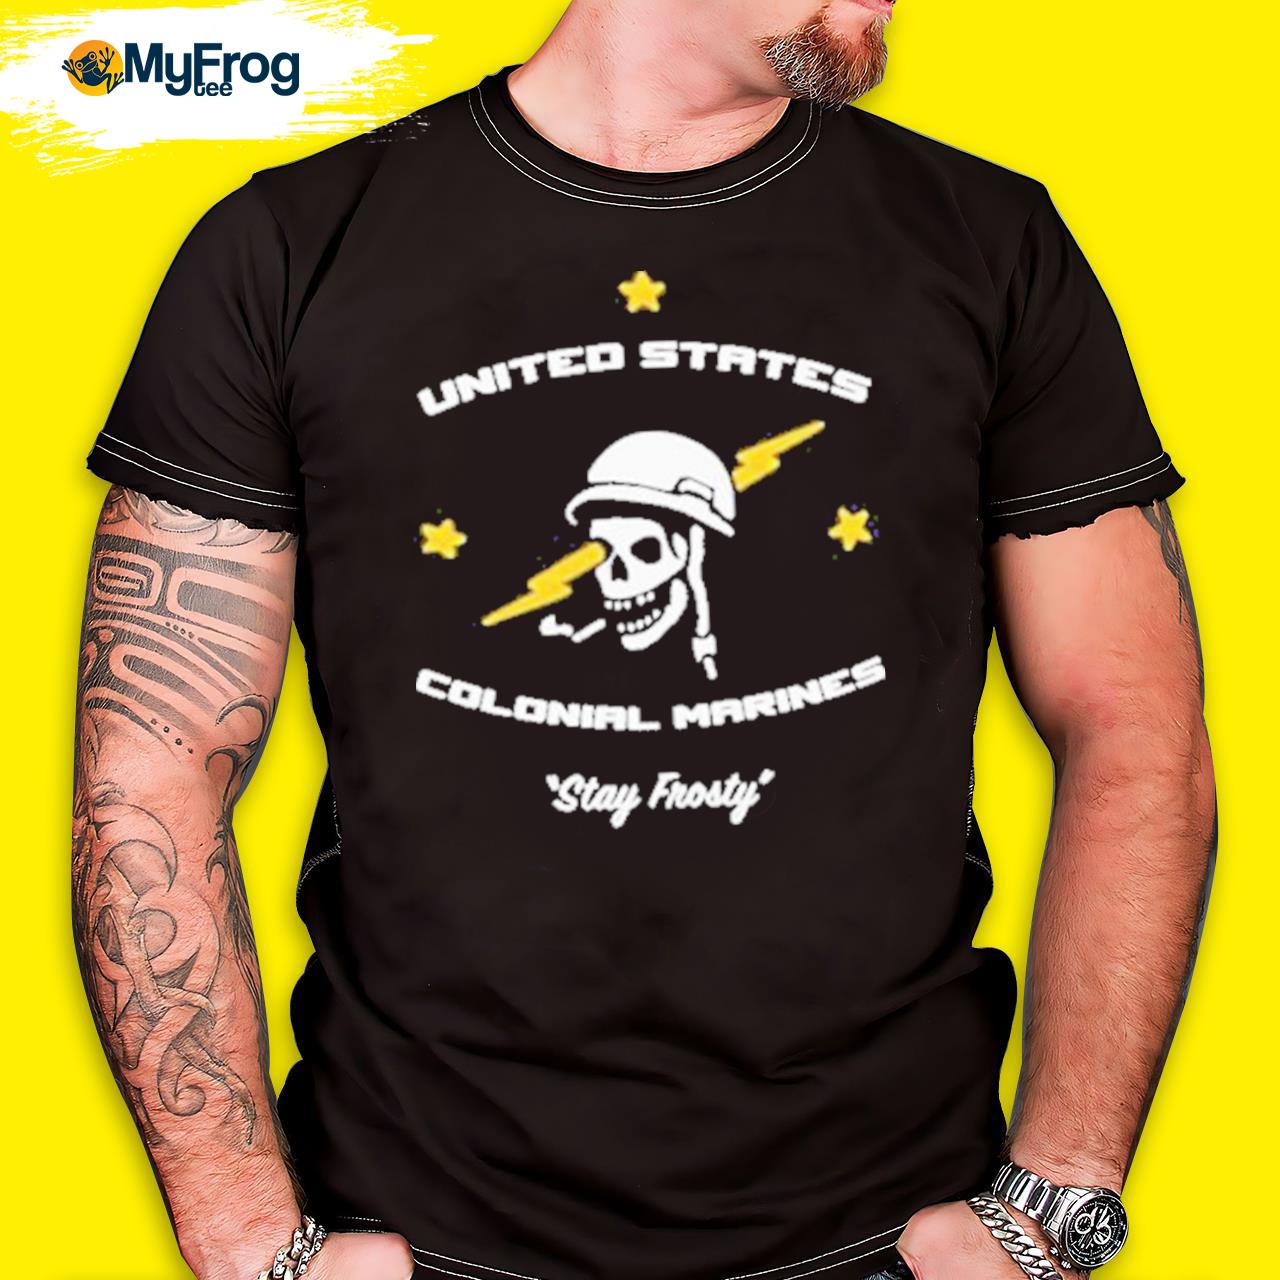 United States Colonial Marines Stay Frosty Shirt